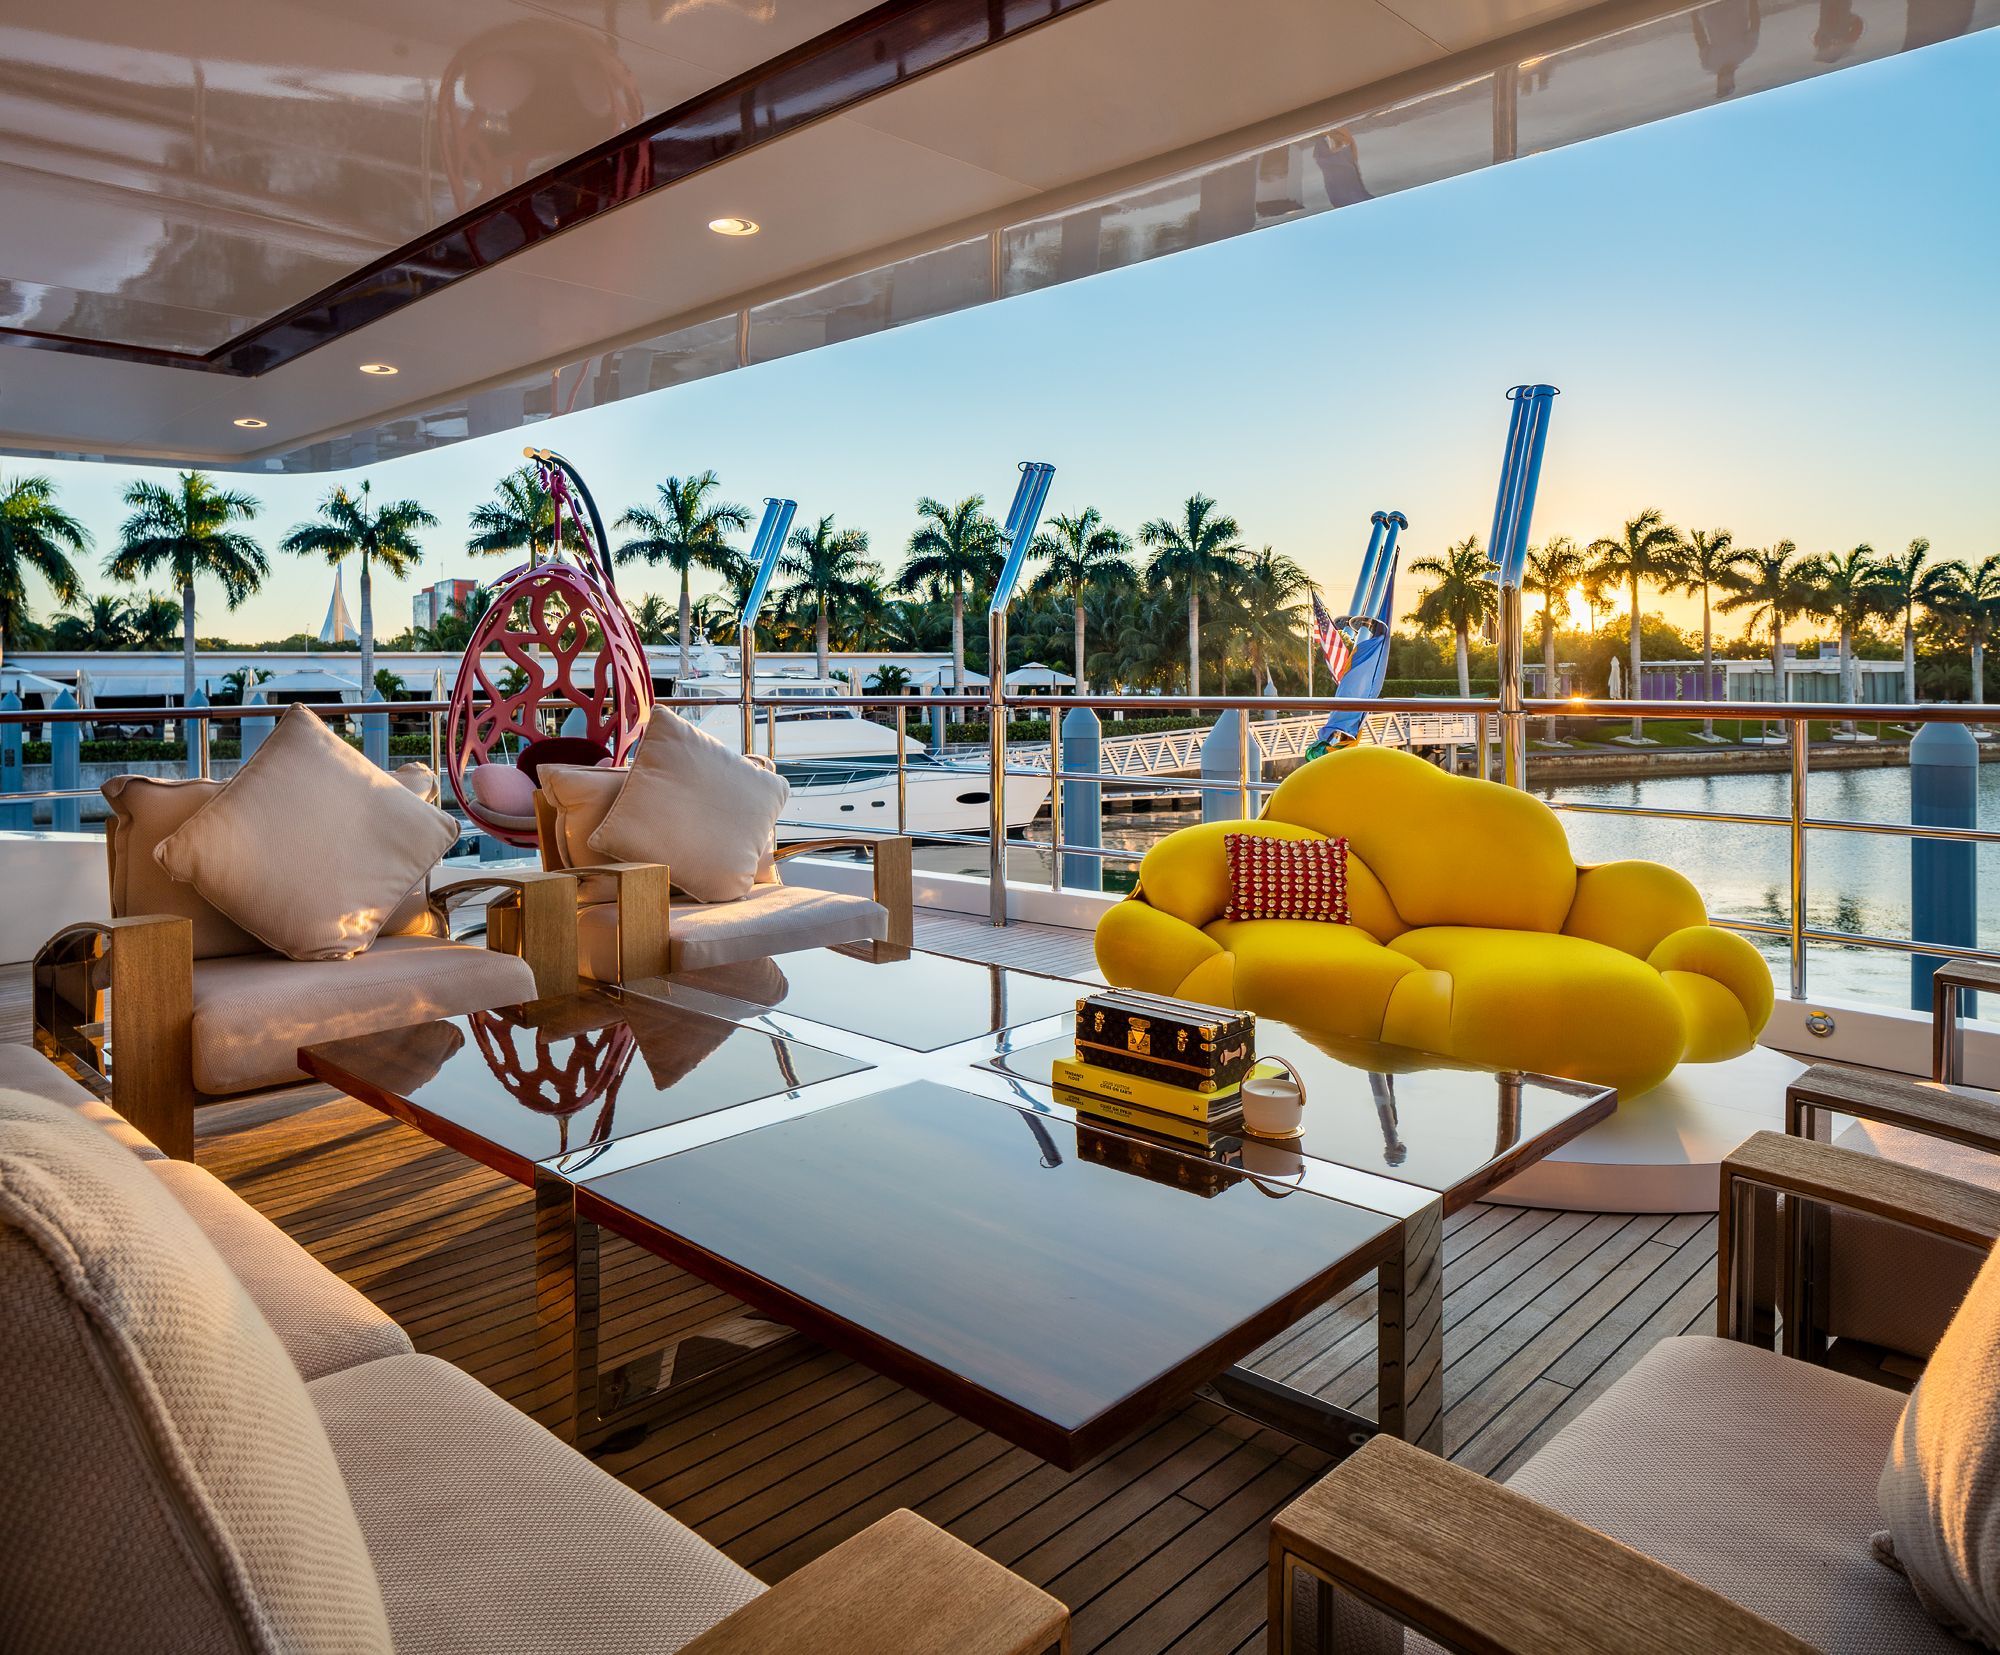 Louis Vuitton Is Showcasing Its Homewares on a Yacht in Miami  Robb Report